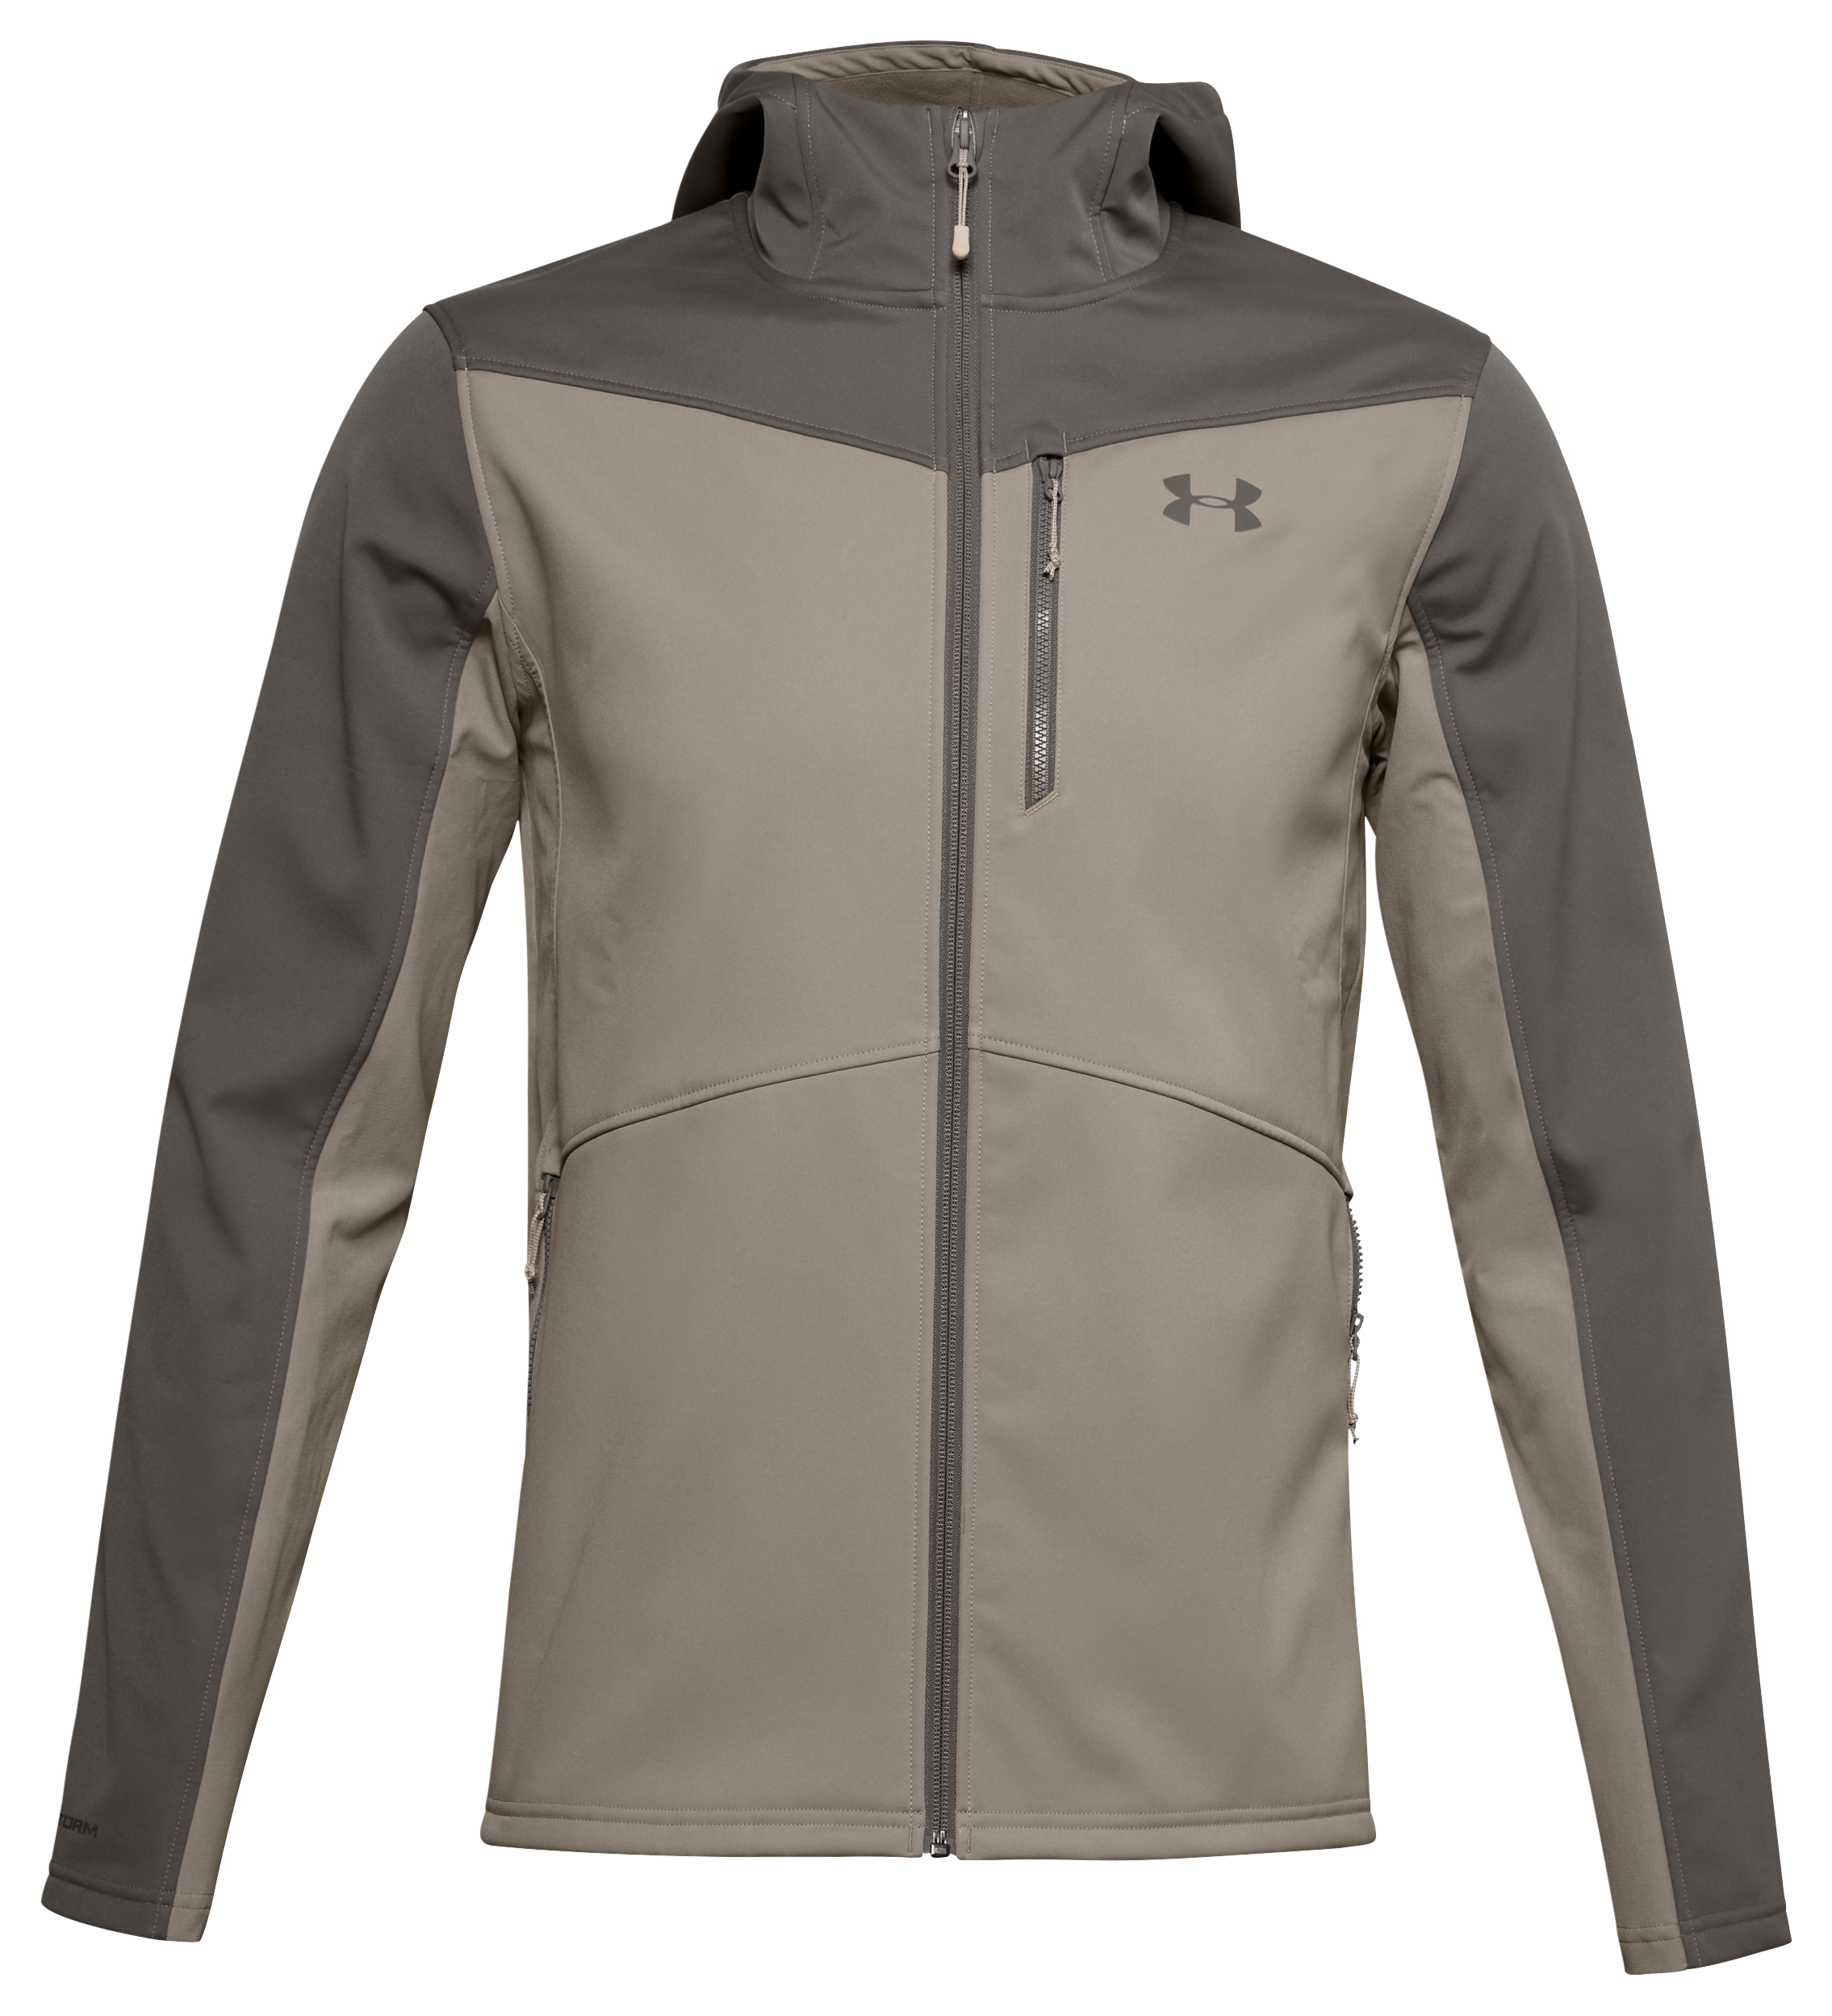 Under Armour ColdGear INFRARED Shield Hooded Jacket for Men